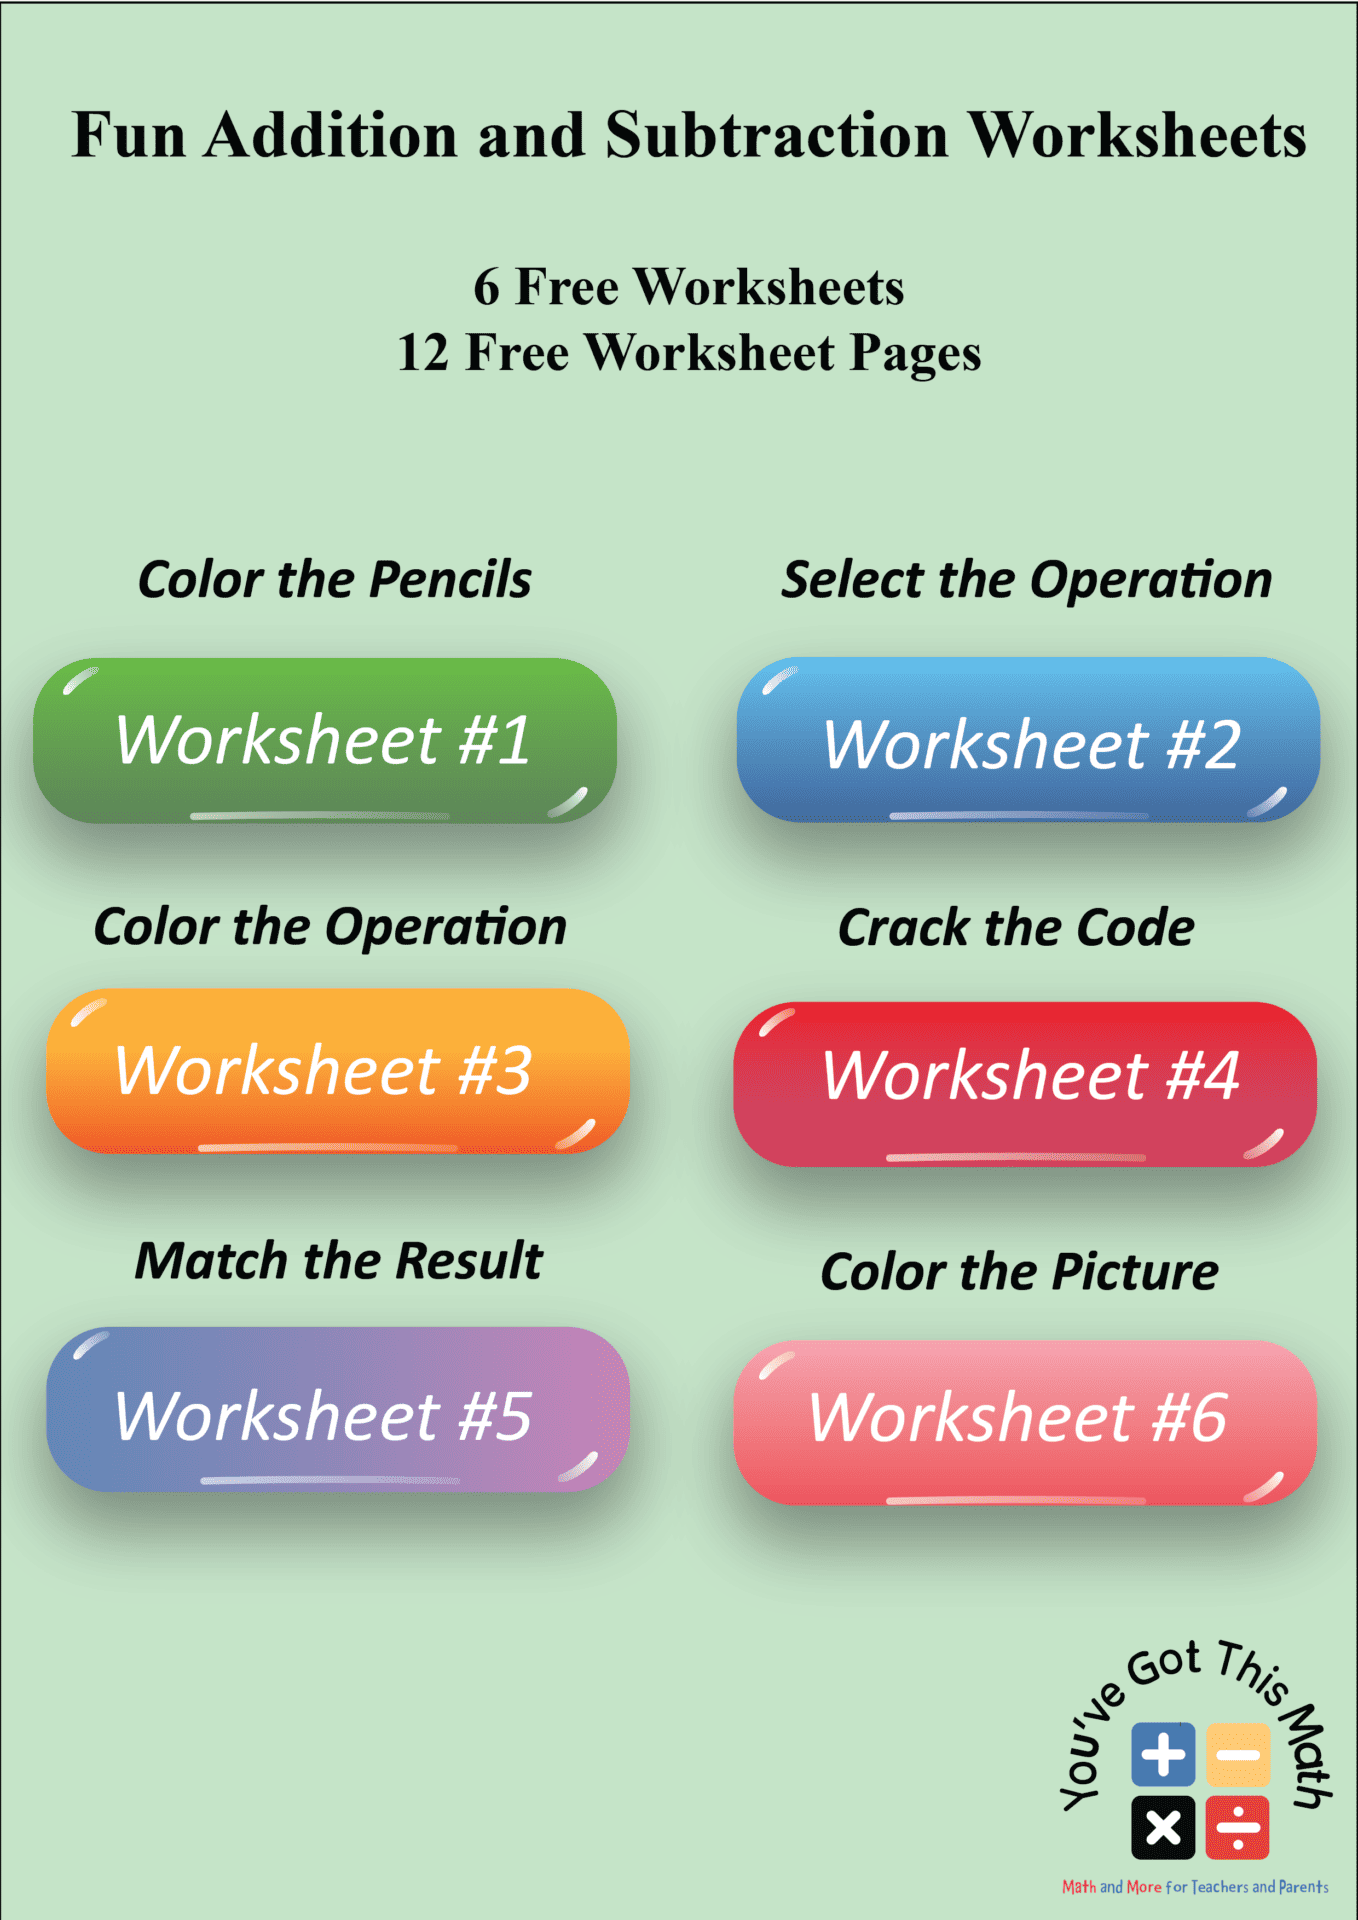 fun-addition-and-subtraction-worksheets-free-printable